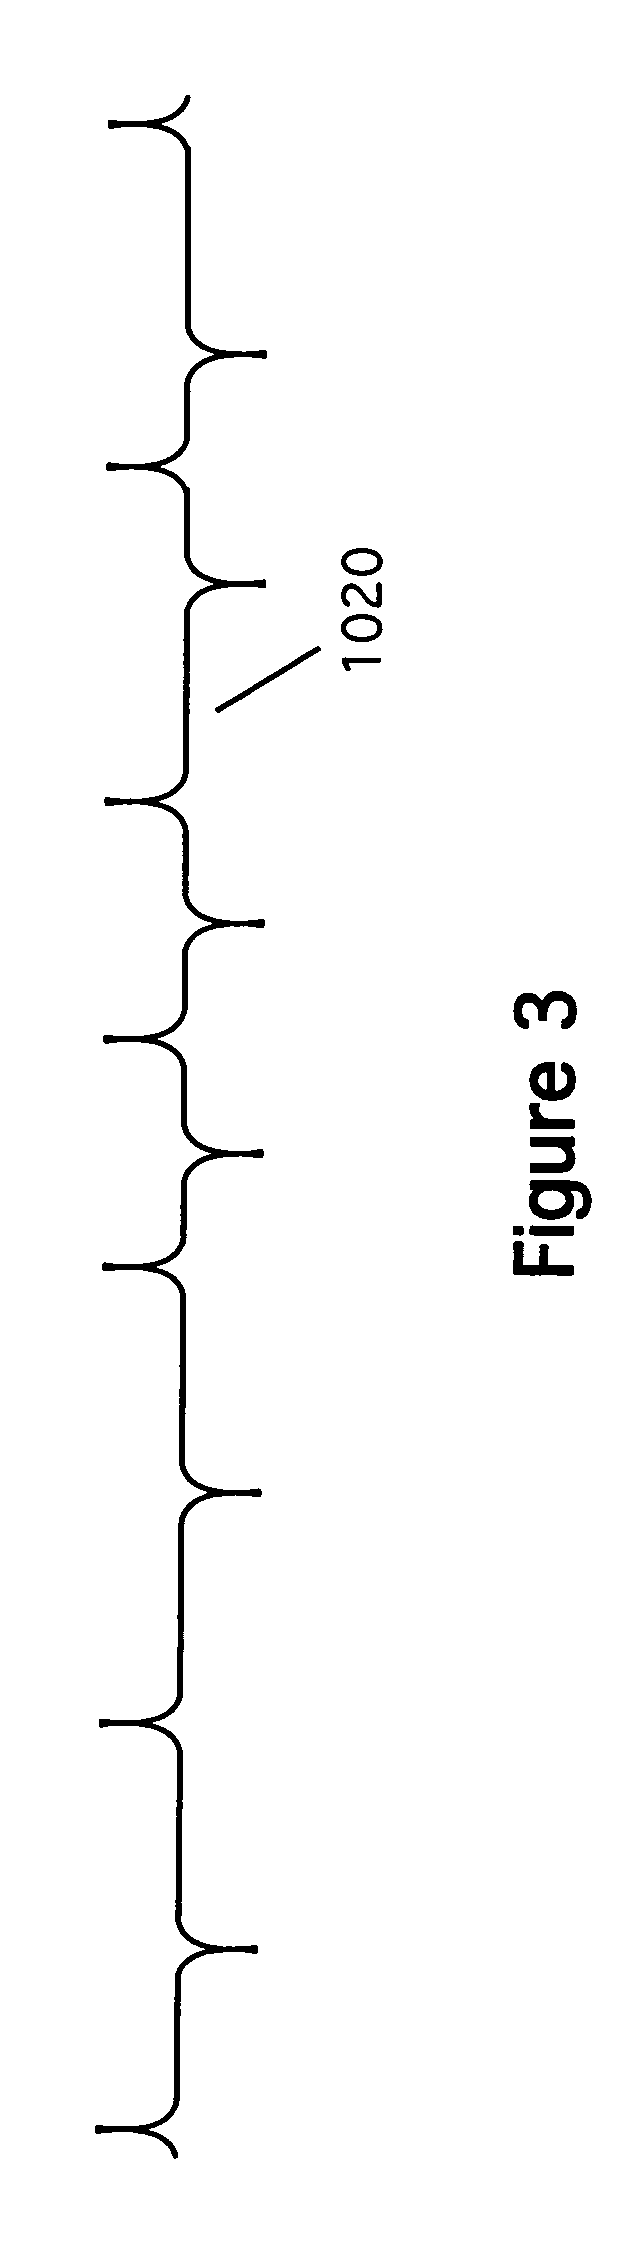 Method of use of a simulated magnetic stripe card system for use with magnetic stripe card reading terminals